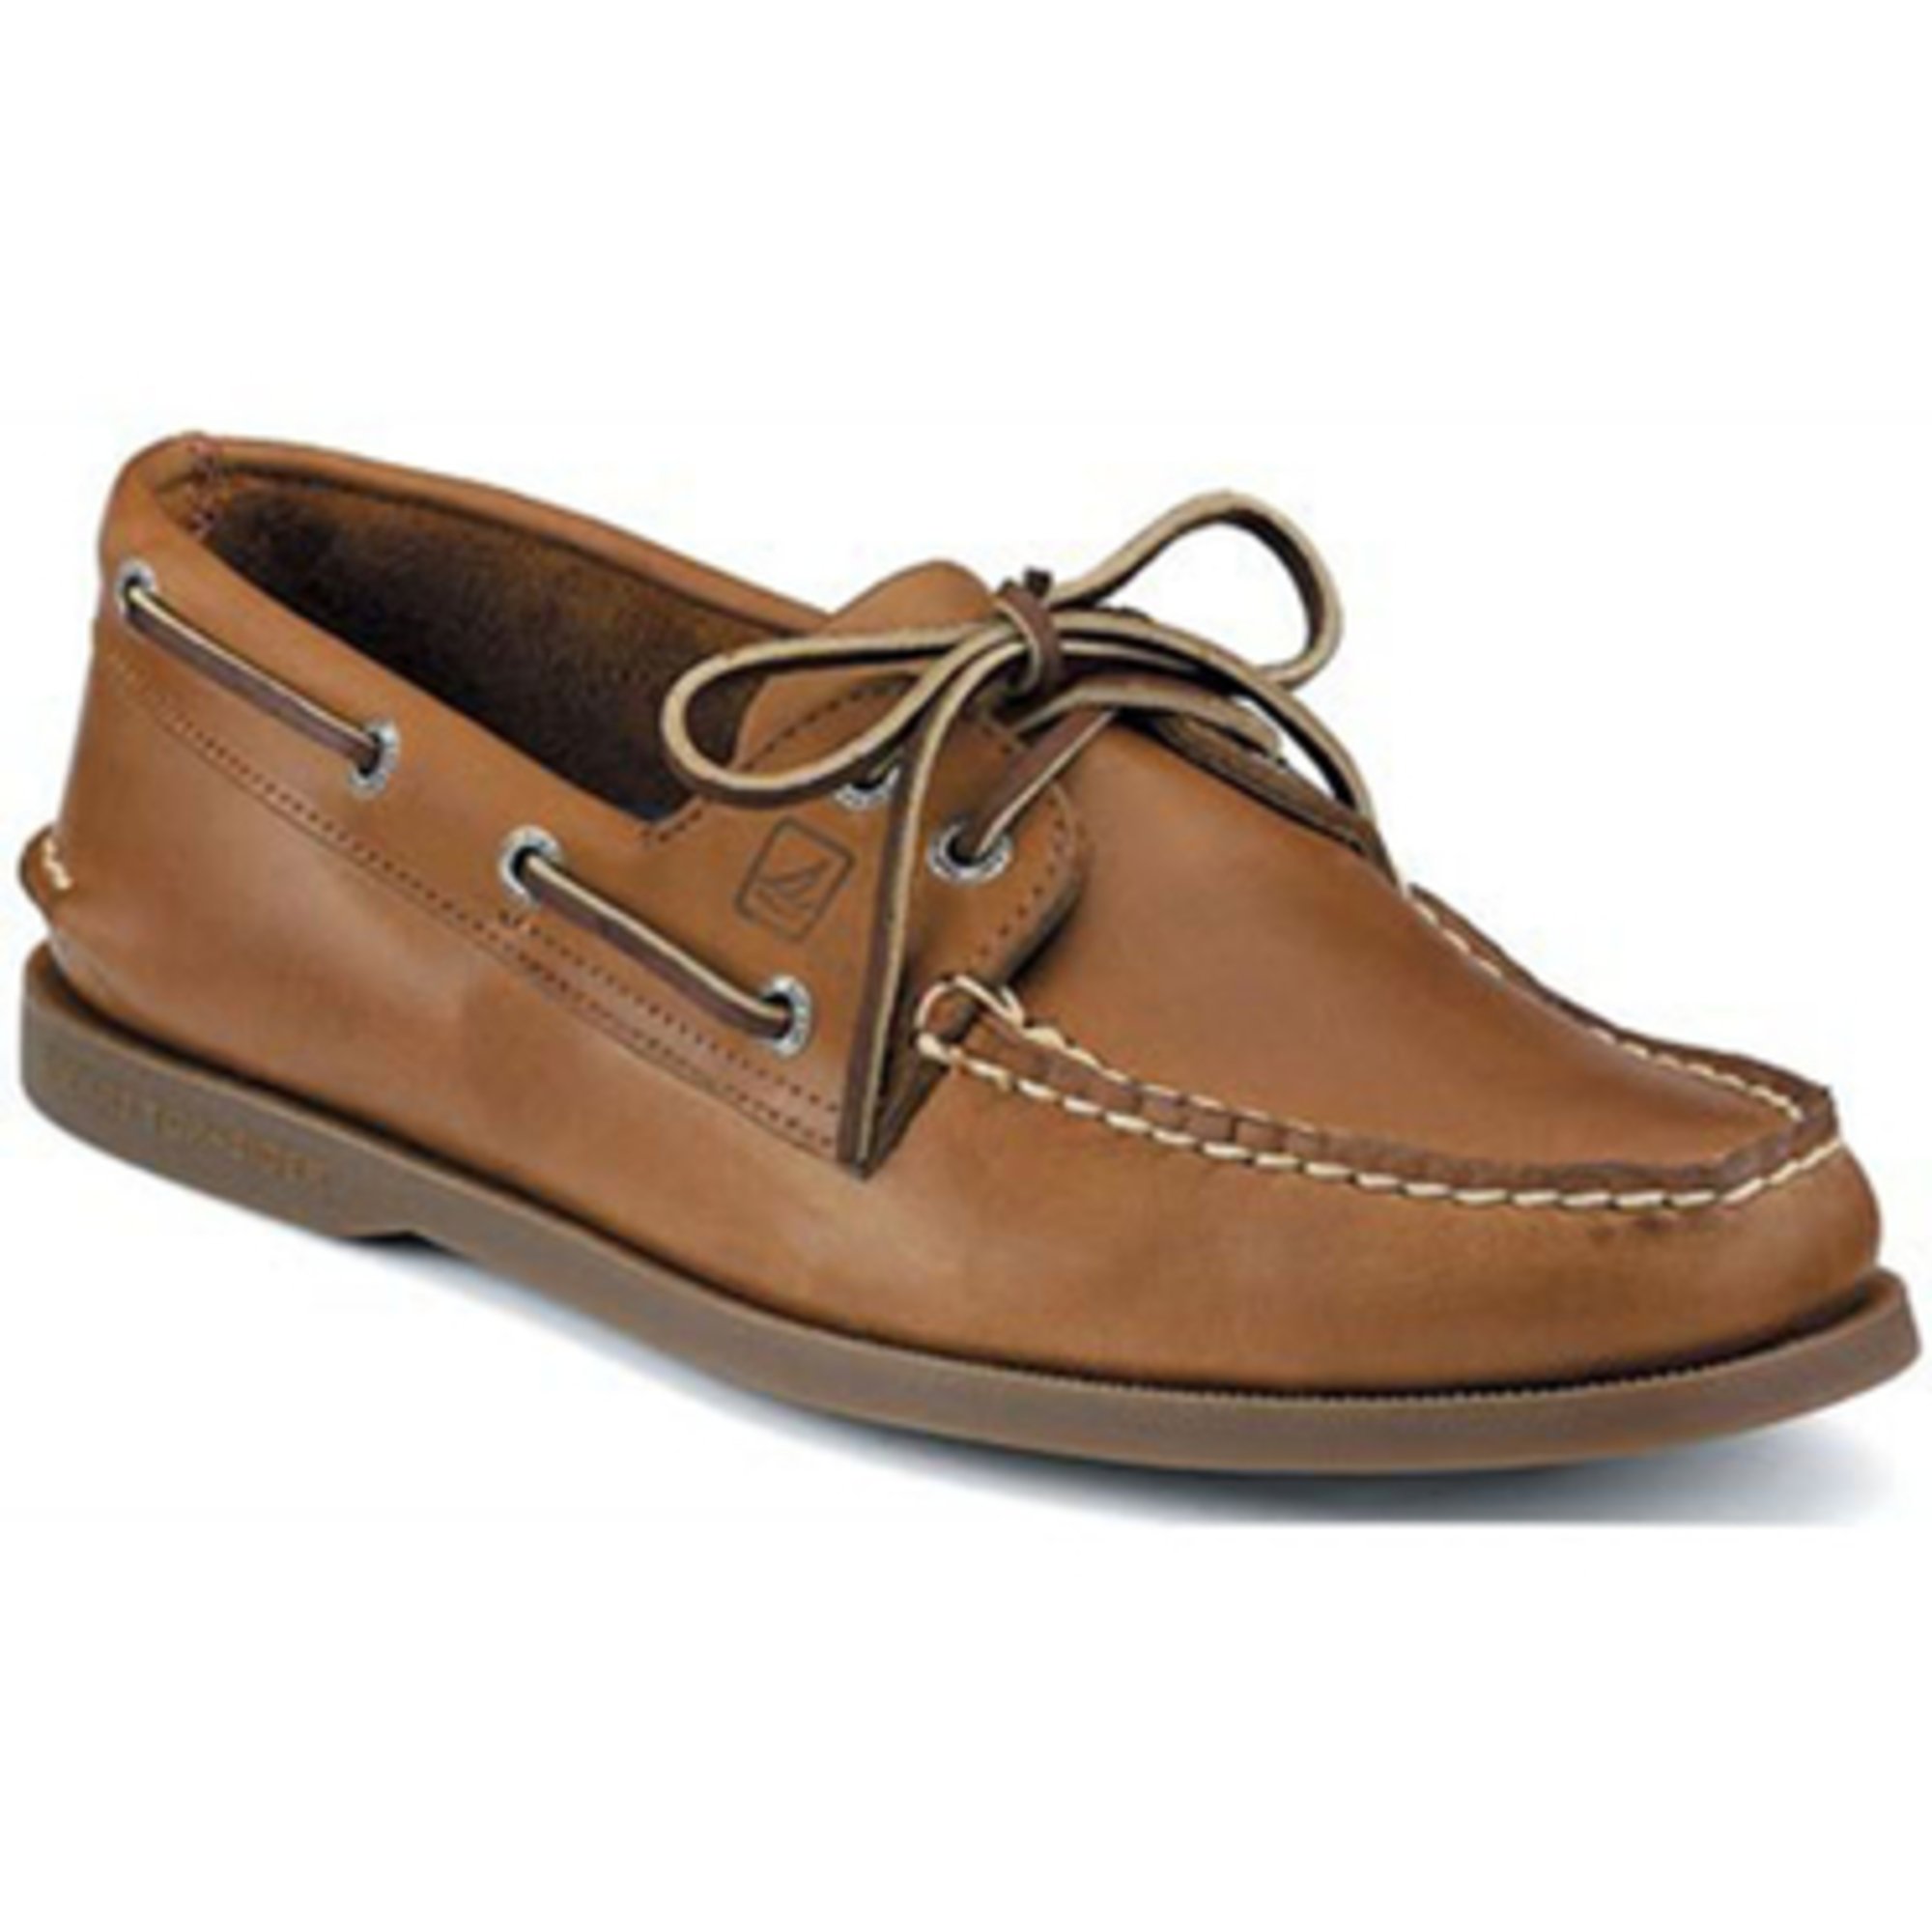 sperry top sider shoes